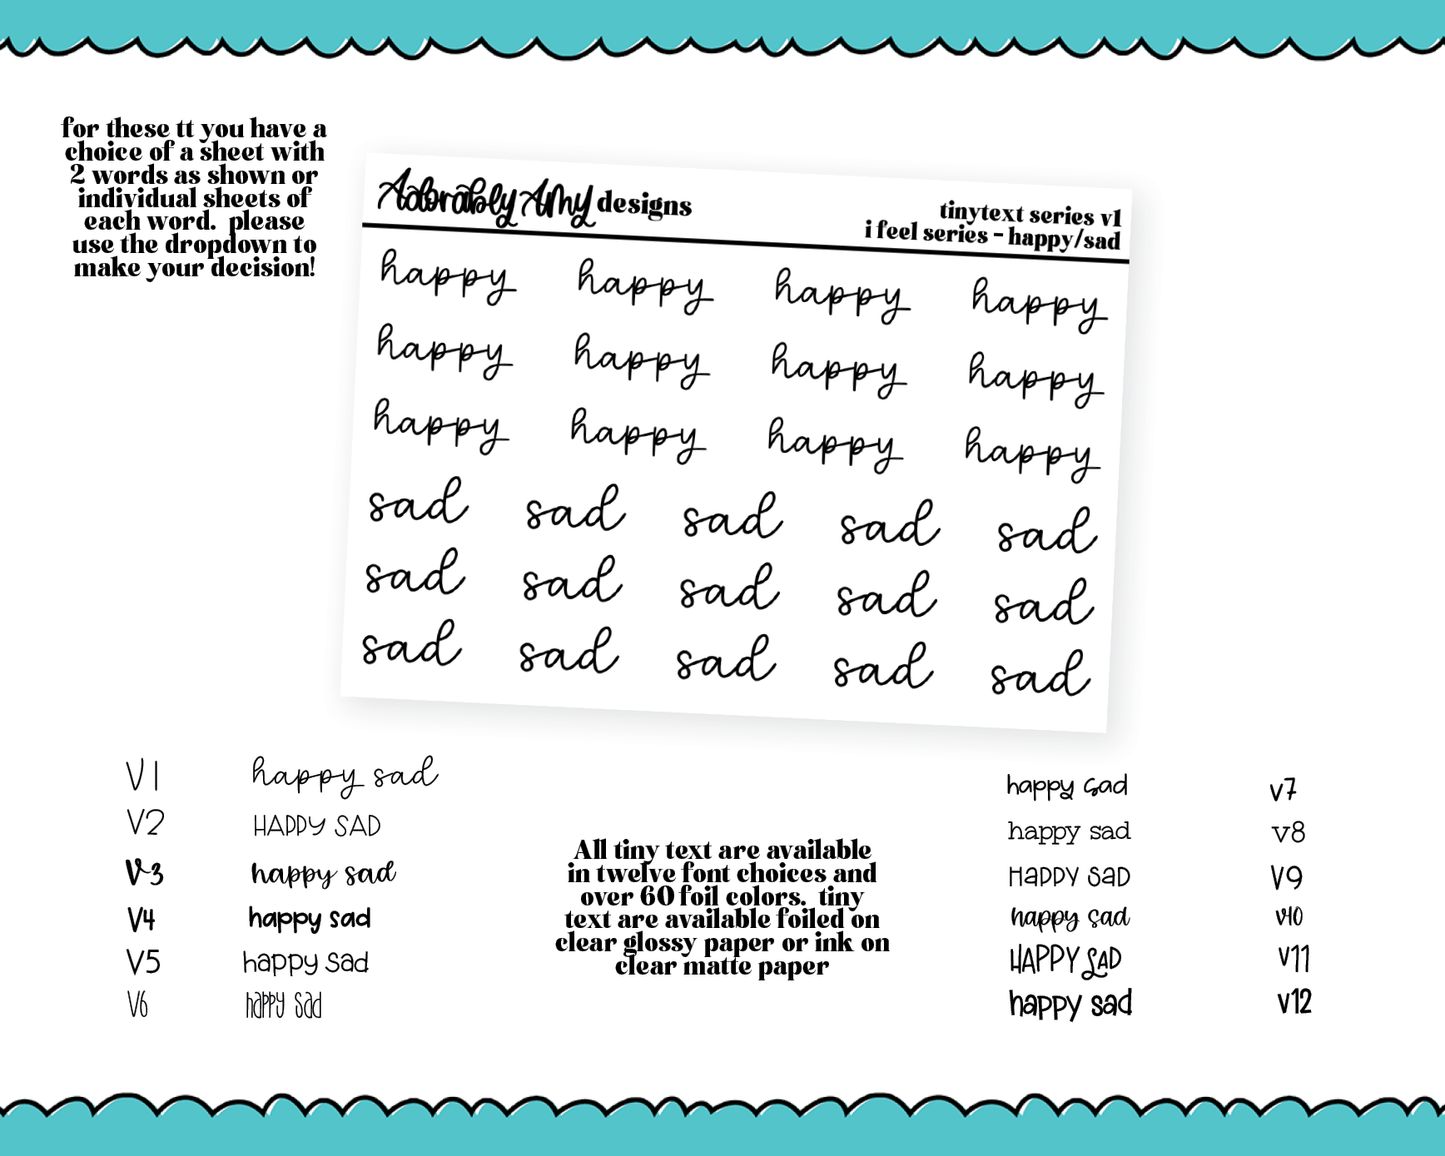 Foiled Tiny Text Series - Feelings Series - Happy and Sad Checklist Size Planner Stickers for any Planner or Insert